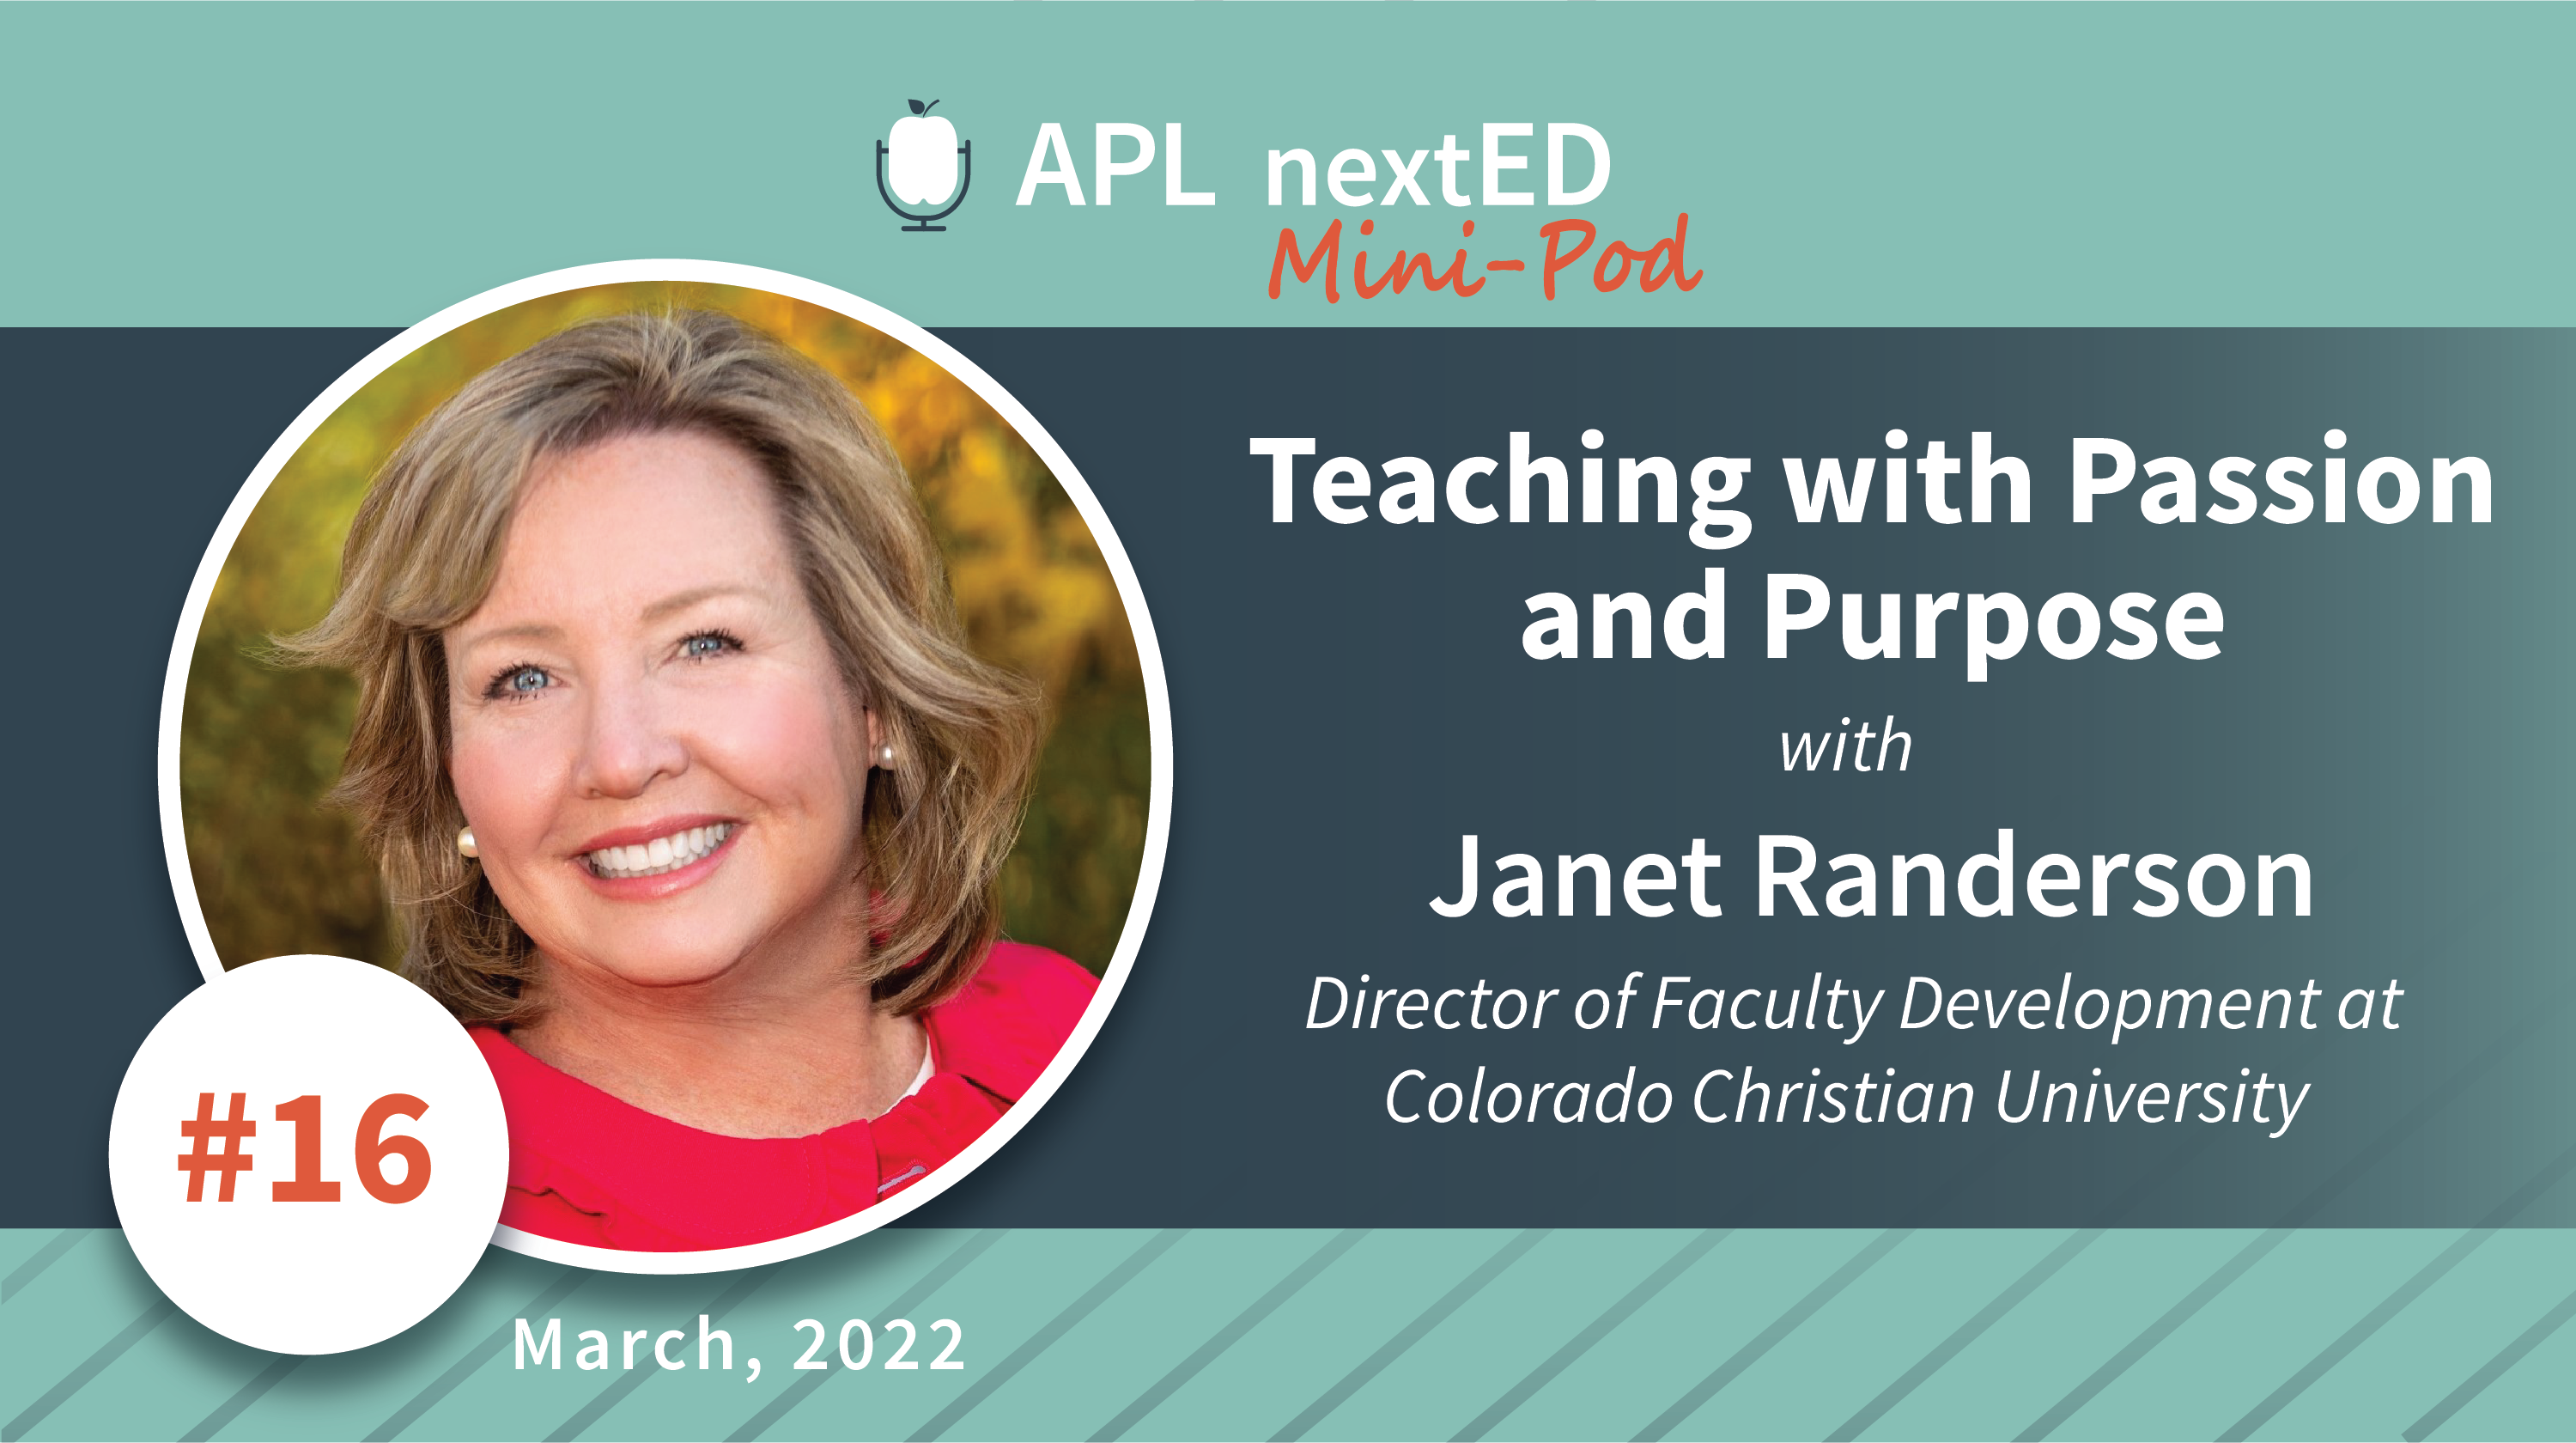 APL nextED Mini-Pod Teaching with Passion and Purpose with Janet Randerson